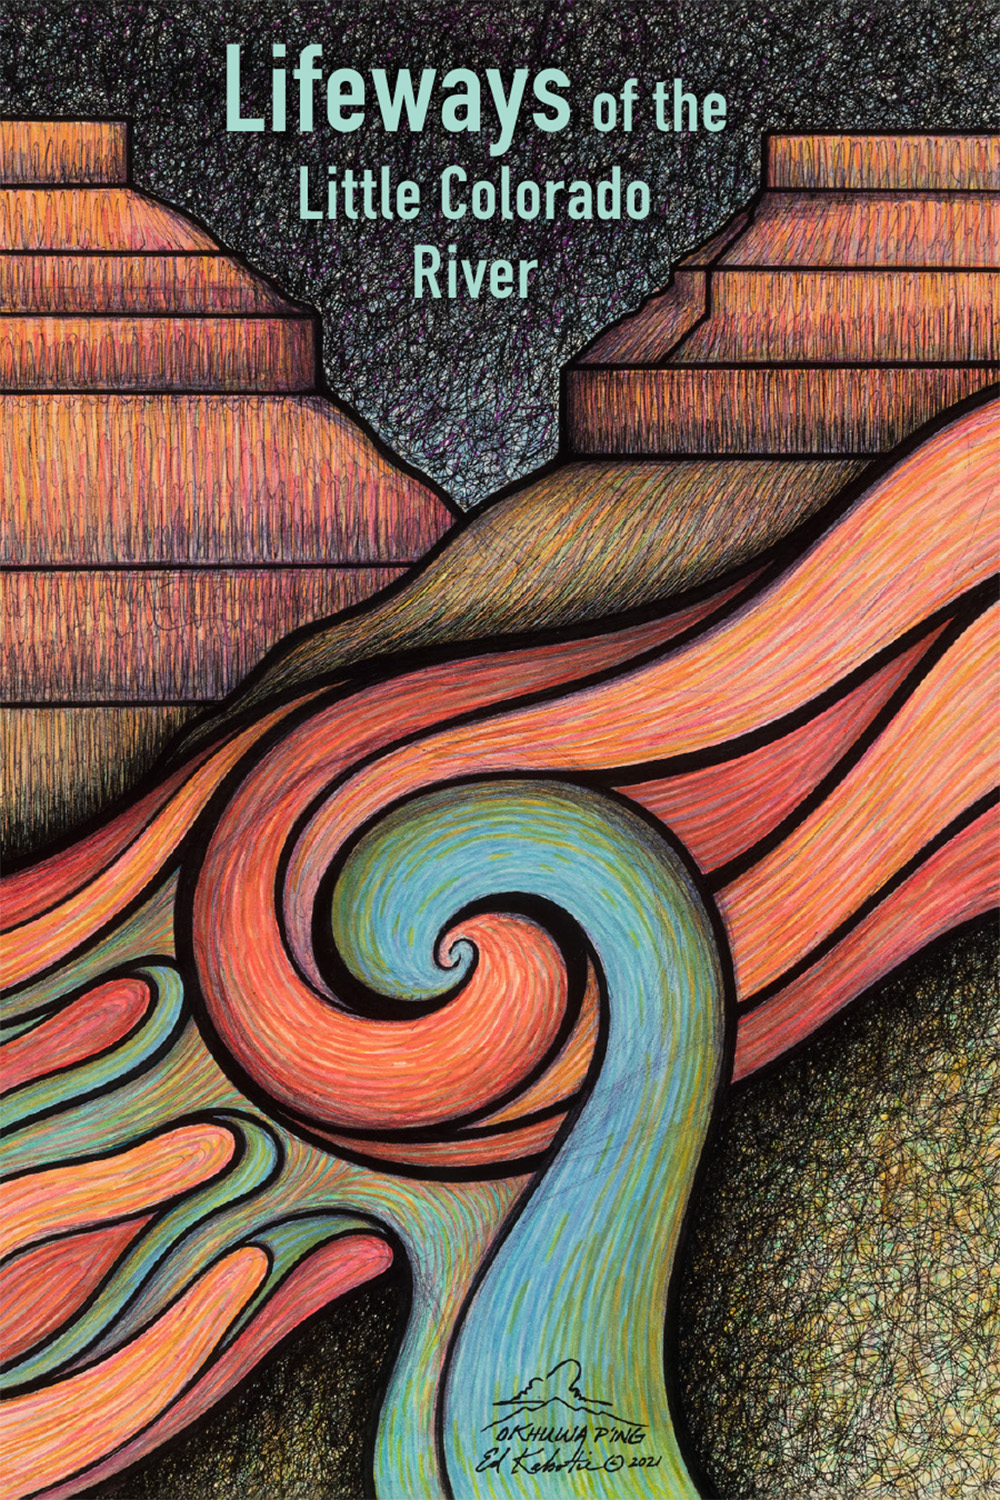 Lifeways of the Little Colorado River booklet